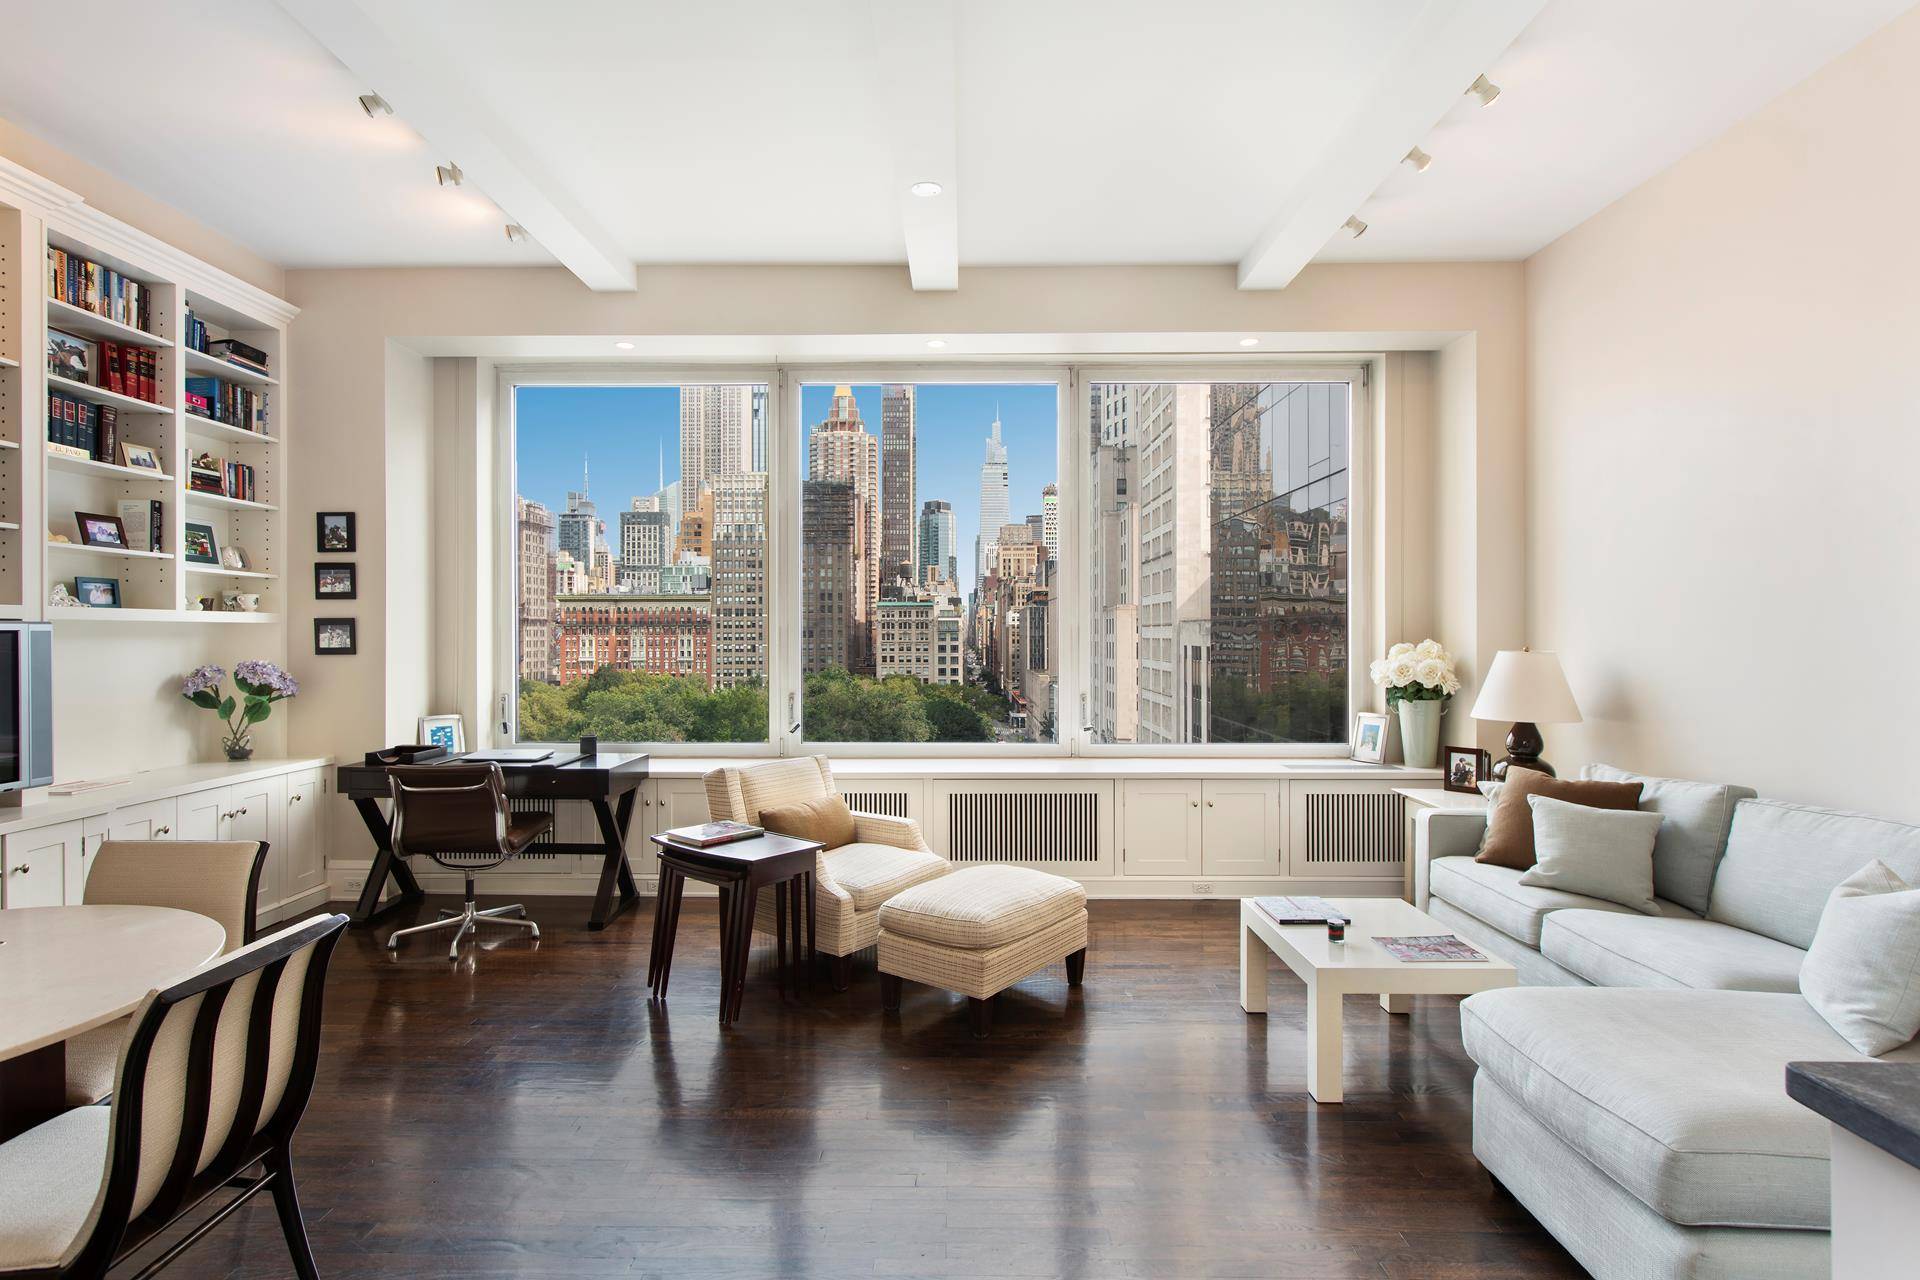 XXX mint 1 bedroom loft coop apt with oversized living dining area, high ceilings over 11ft, and jaw dropping views of Madison Square Park, Empire State Building and captivating NYC ...